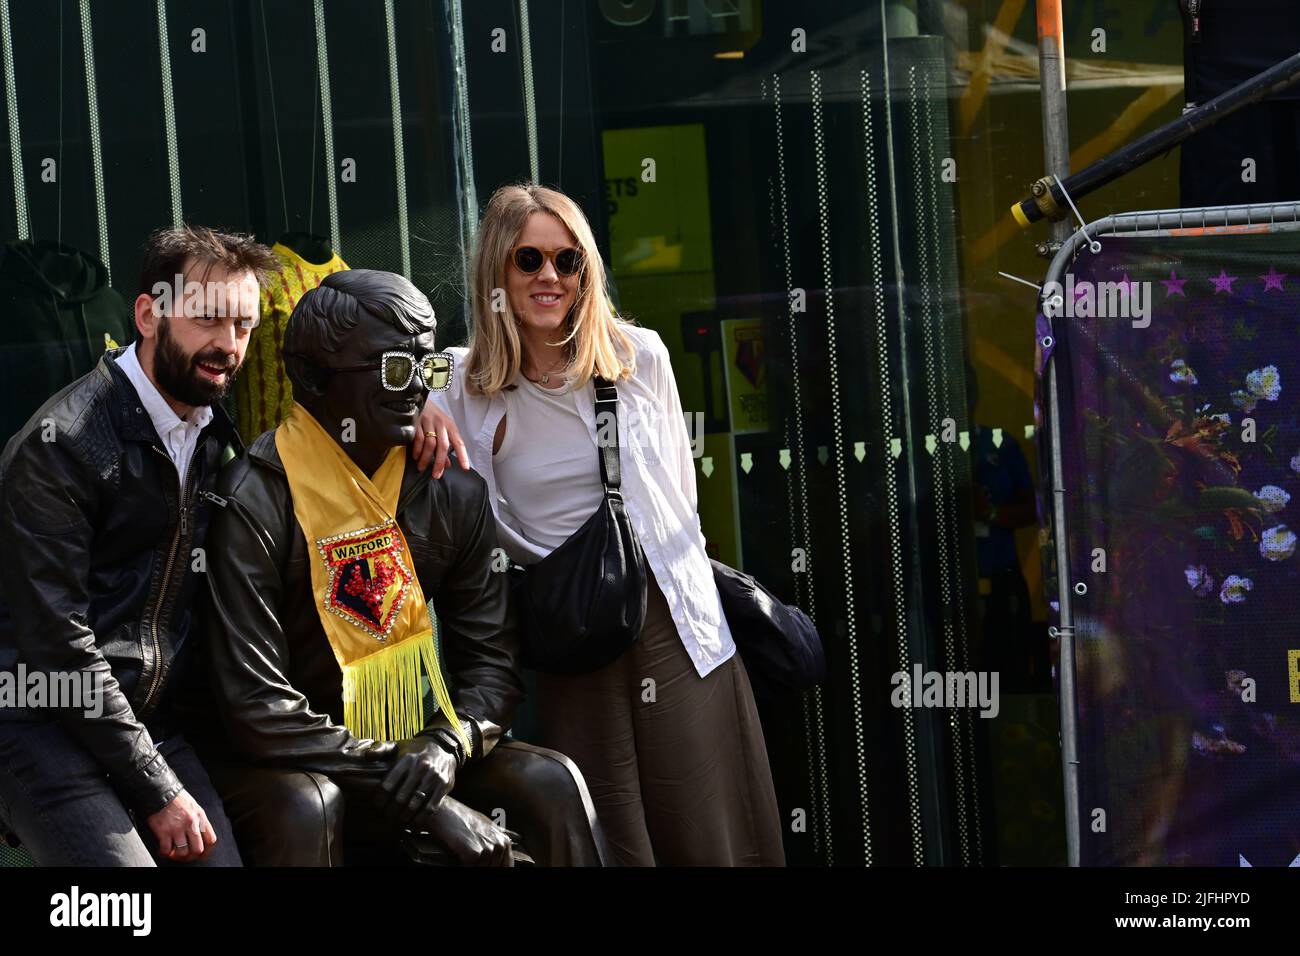 Fans pose with Graham Taylor Statue with Watford FC scarf Stock Photo